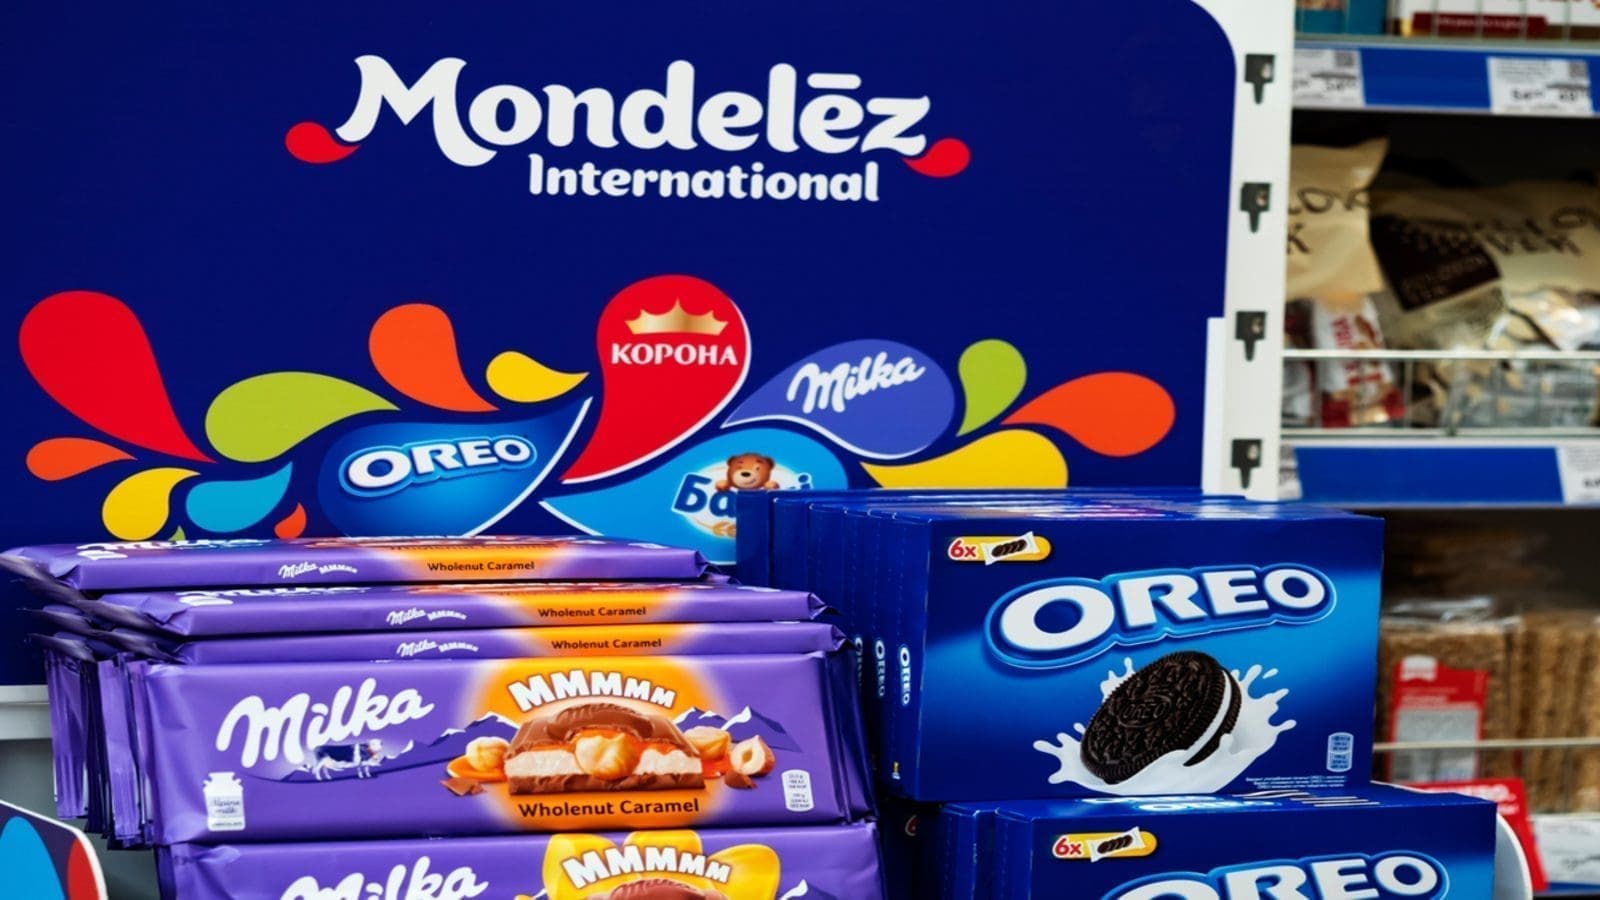 Mondelez resumes production at location hit by Barry Callebaut Salmonella scare